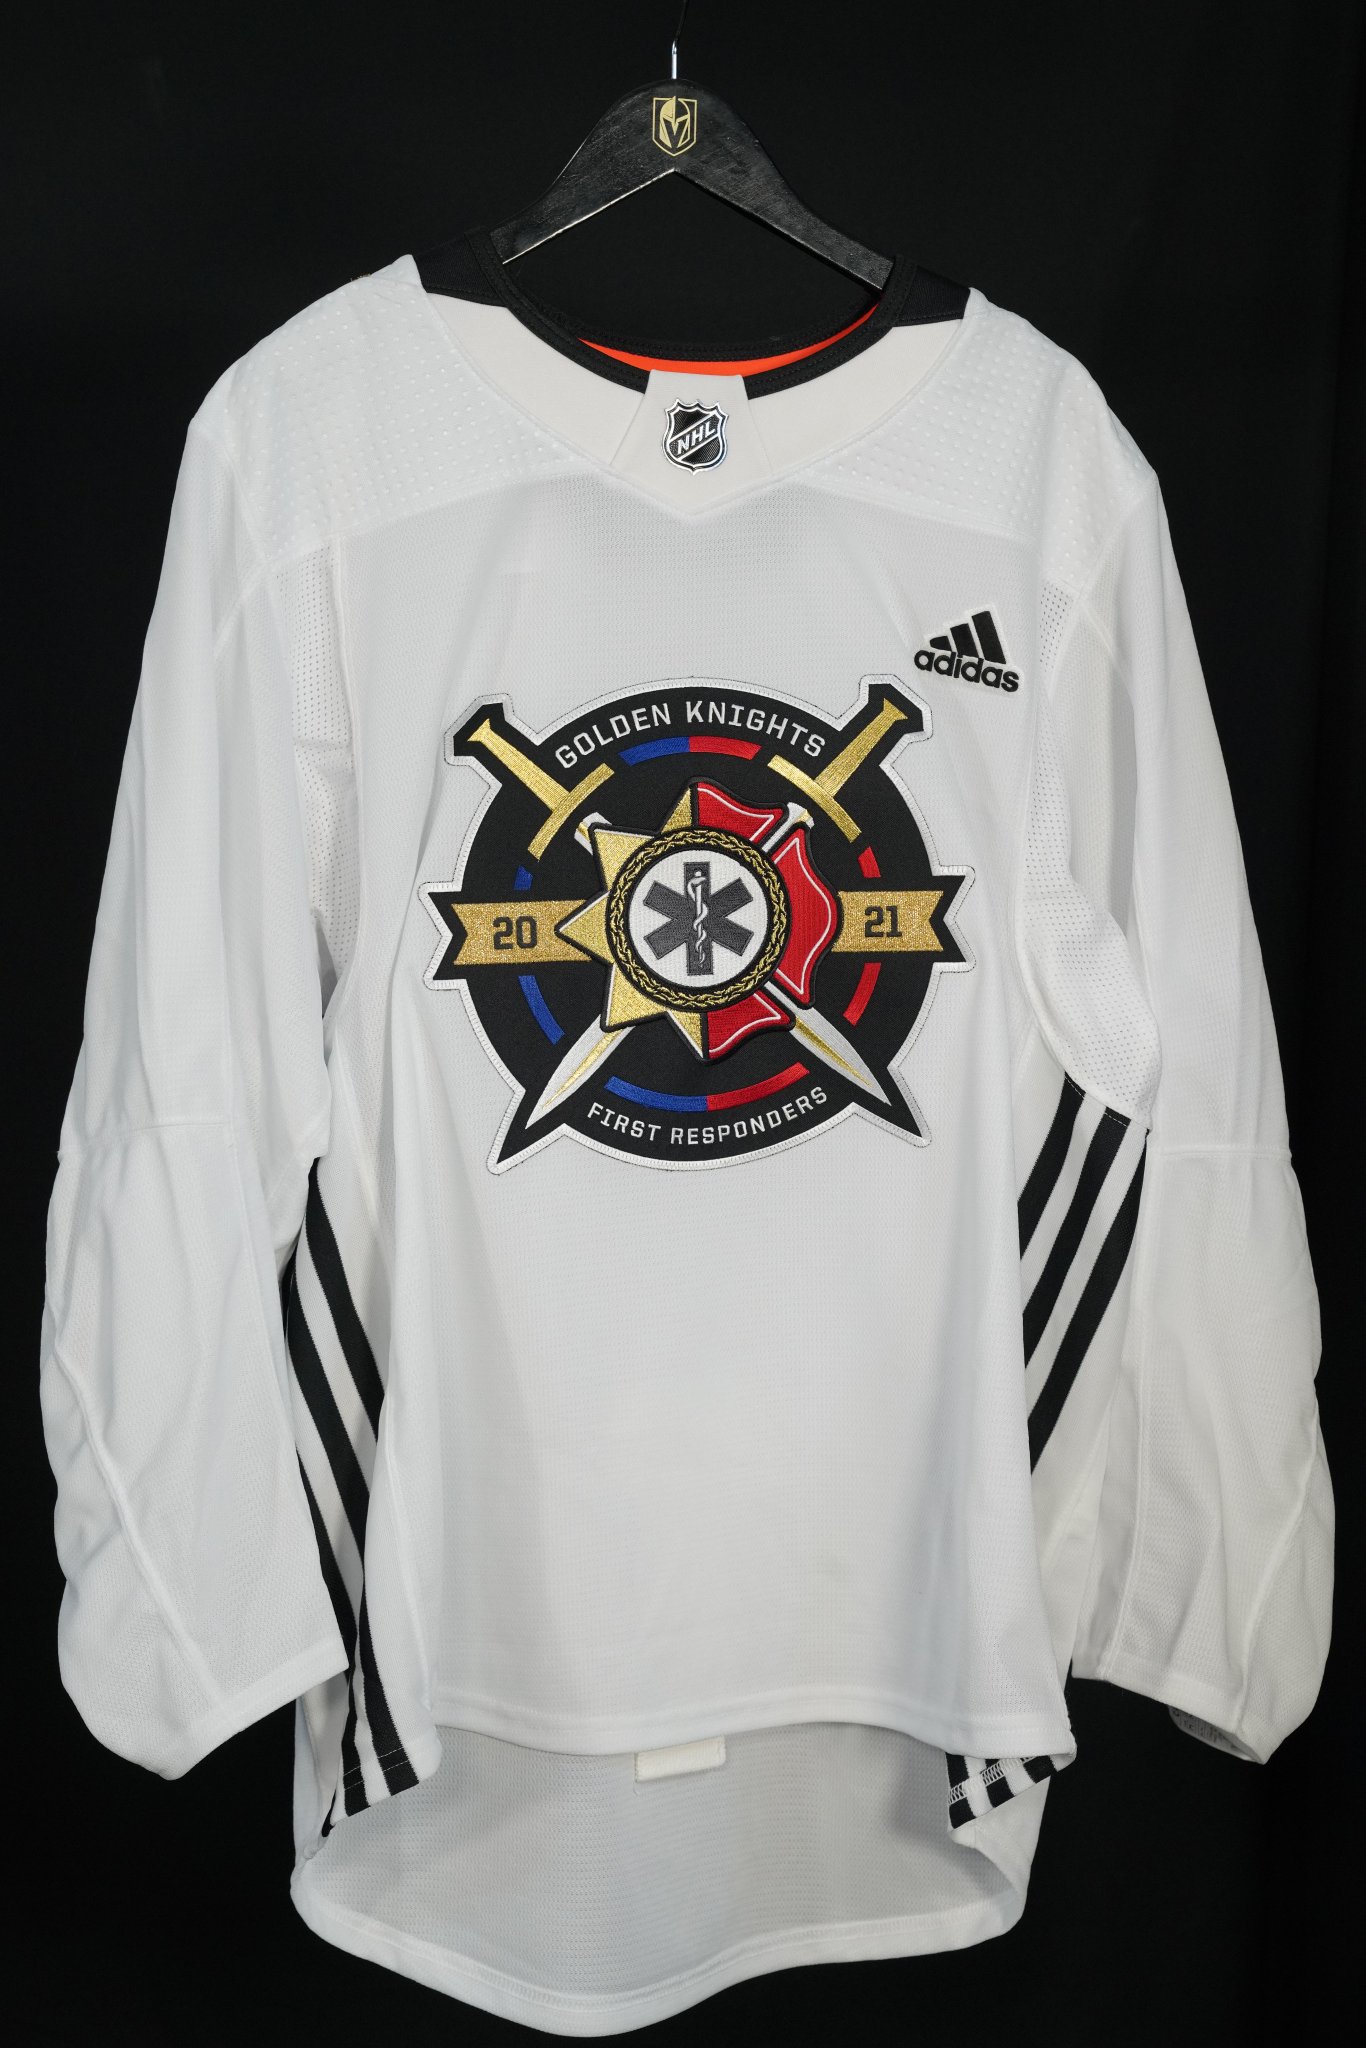 Have the jackets ever worn warm up first responder jerseys? This is the  image for the warm up jerseys they are auctioning off Saturday. I think  they have the potential to look